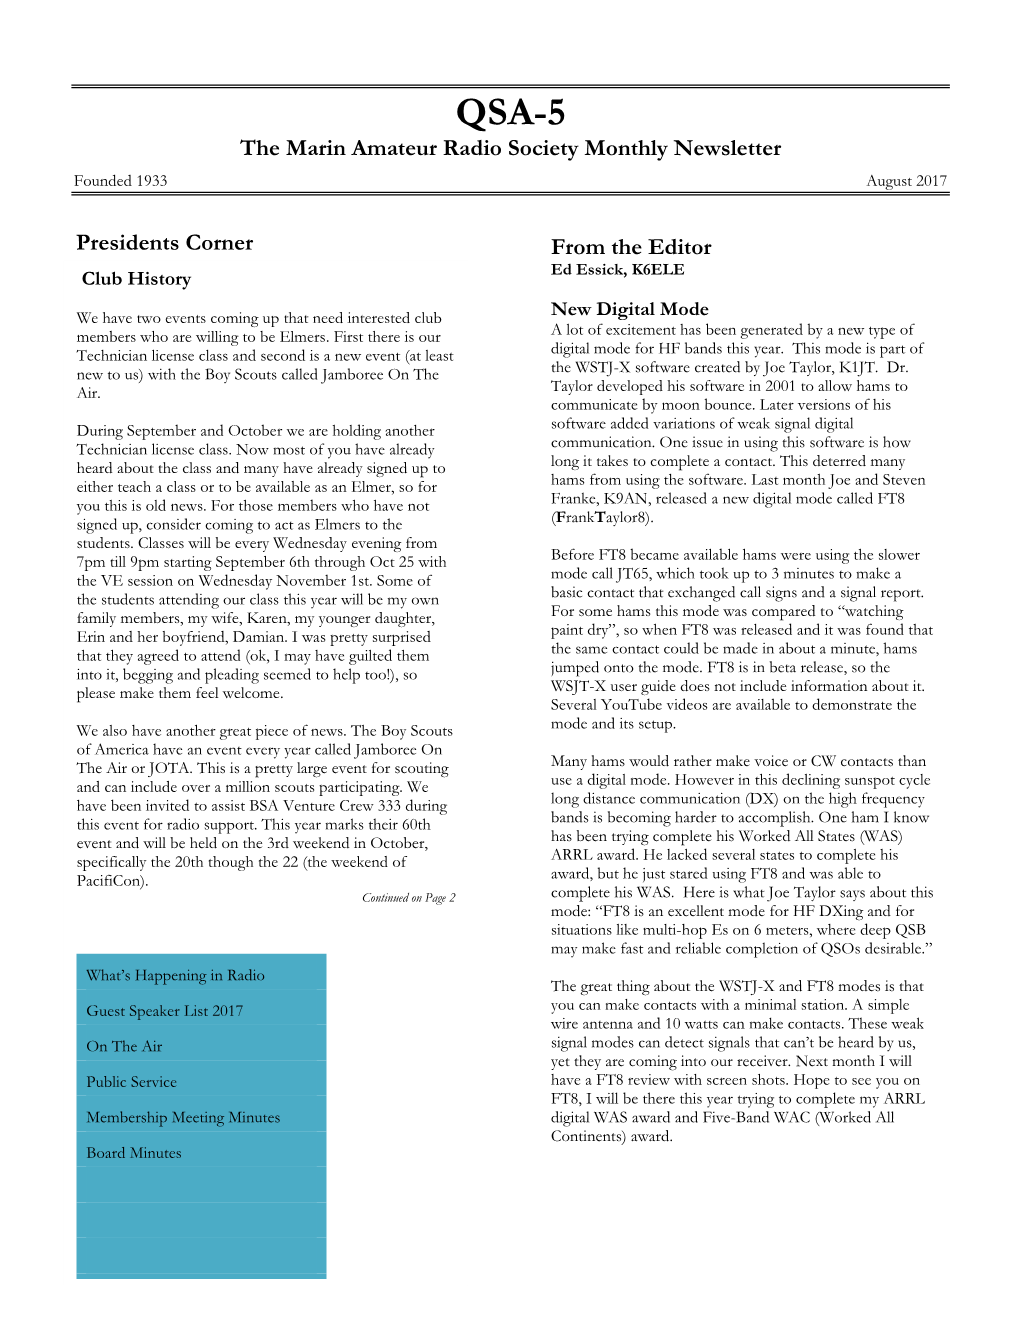 The Marin Amateur Radio Society Monthly Newsletter Presidents Corner from the Editor